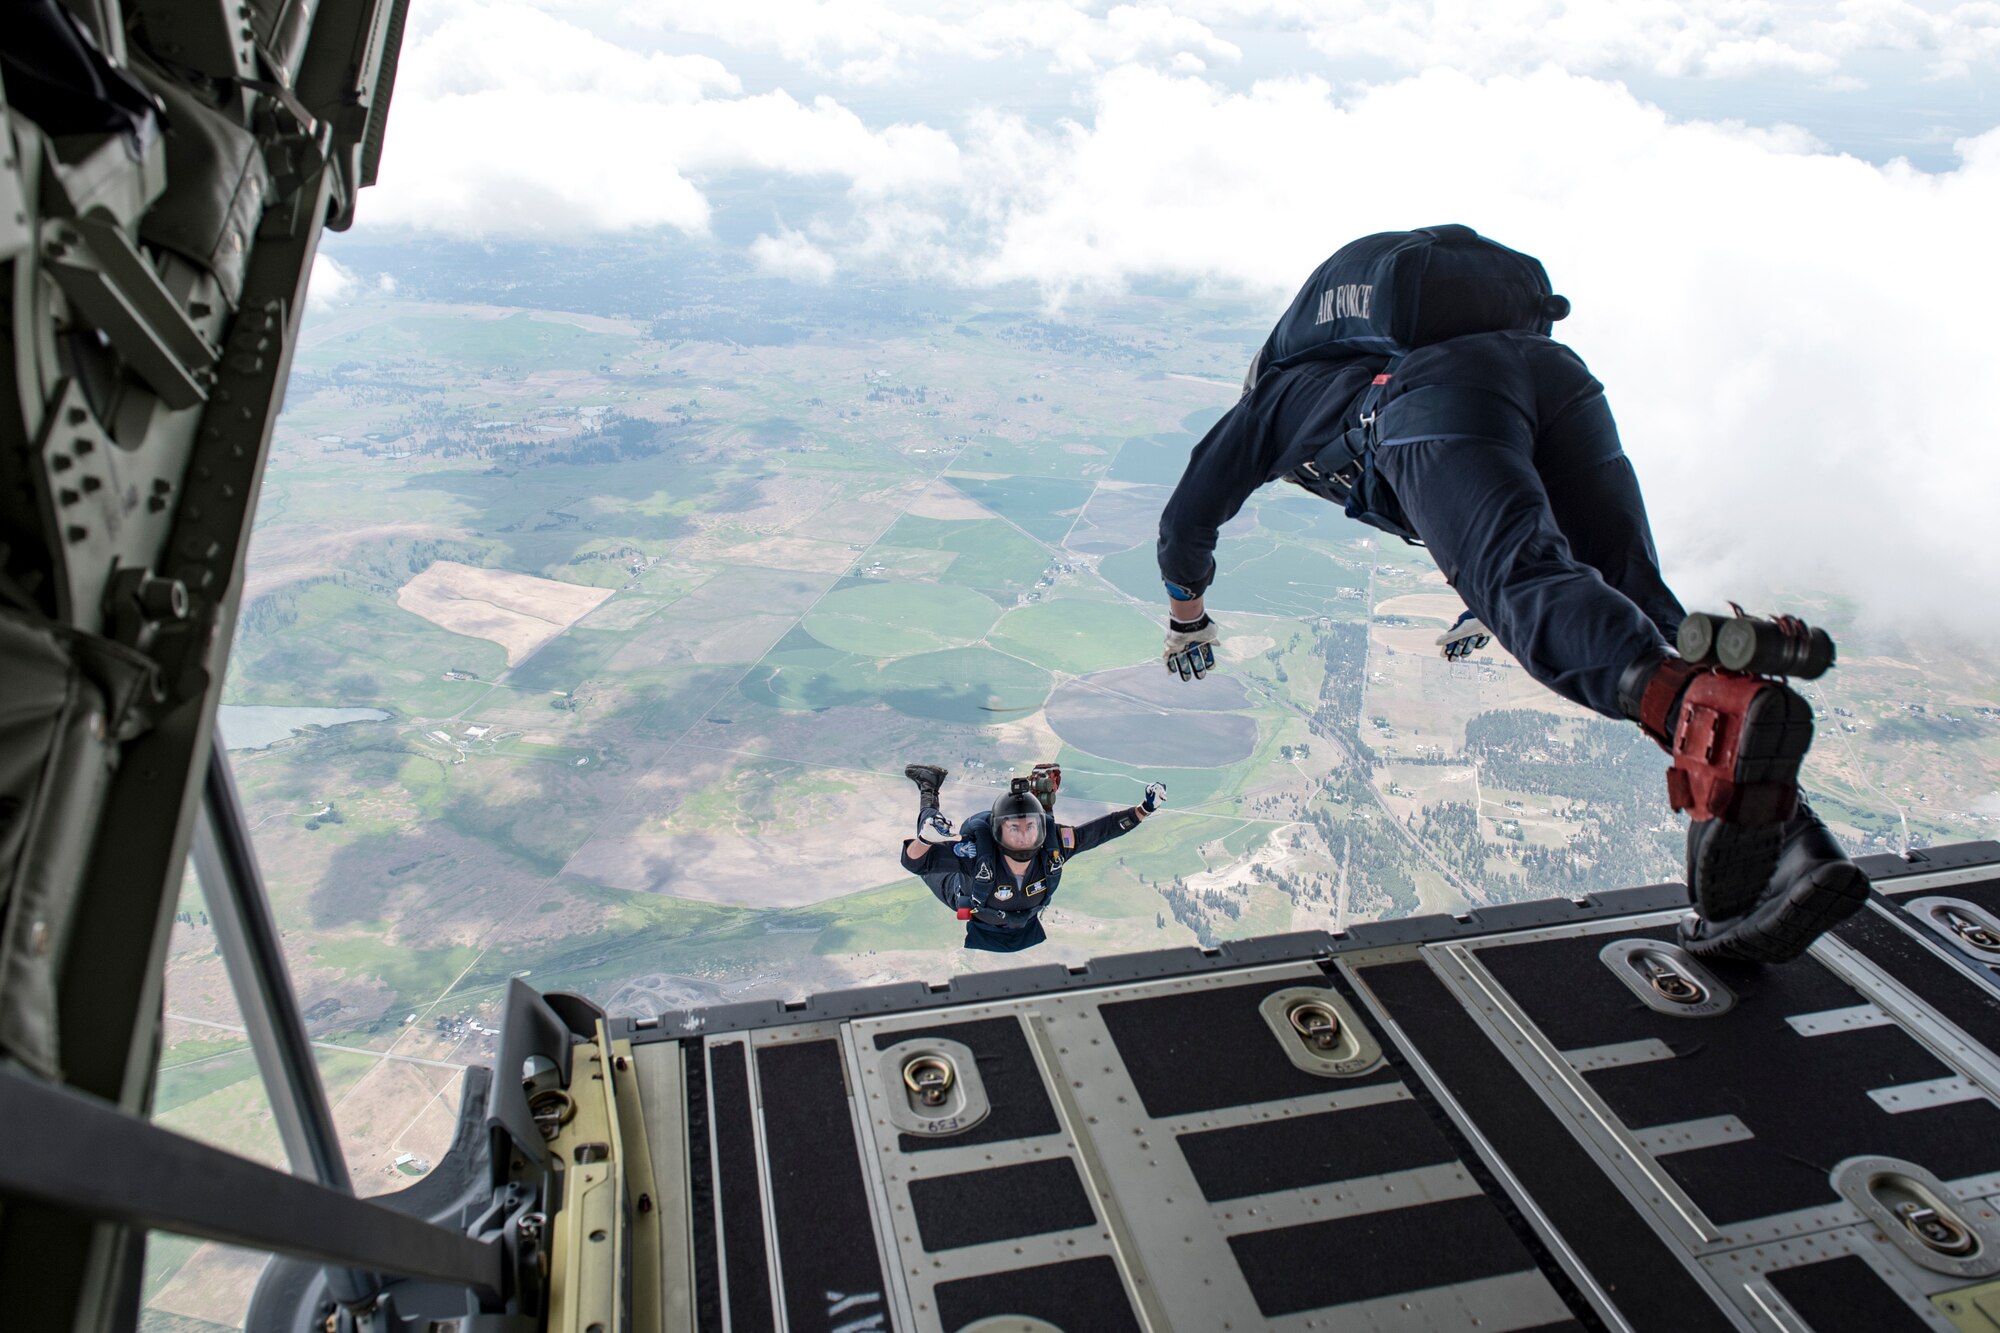 U.S. Air Force Academy Wings of Blue team members Steve Rumsey and Trevor Pratt, , leap off of the C-130 Hercules ramp from 7,700 feet to the ground bellow during the 2019 Skyfest Open House and Airshow performance at Fairchild Air Force Base, Washington, June 22, 2019. Skyfest 2019 offered a unique view of Team Fairchild’s role in enabling Rapid Global Mobility for the U.S. Air Force. The show featured more than 13 aerial acts and 16 static display aircraft, as well as other attractions and displays. (U.S. Air Force photo by Airman 1st Class Whitney Laine)